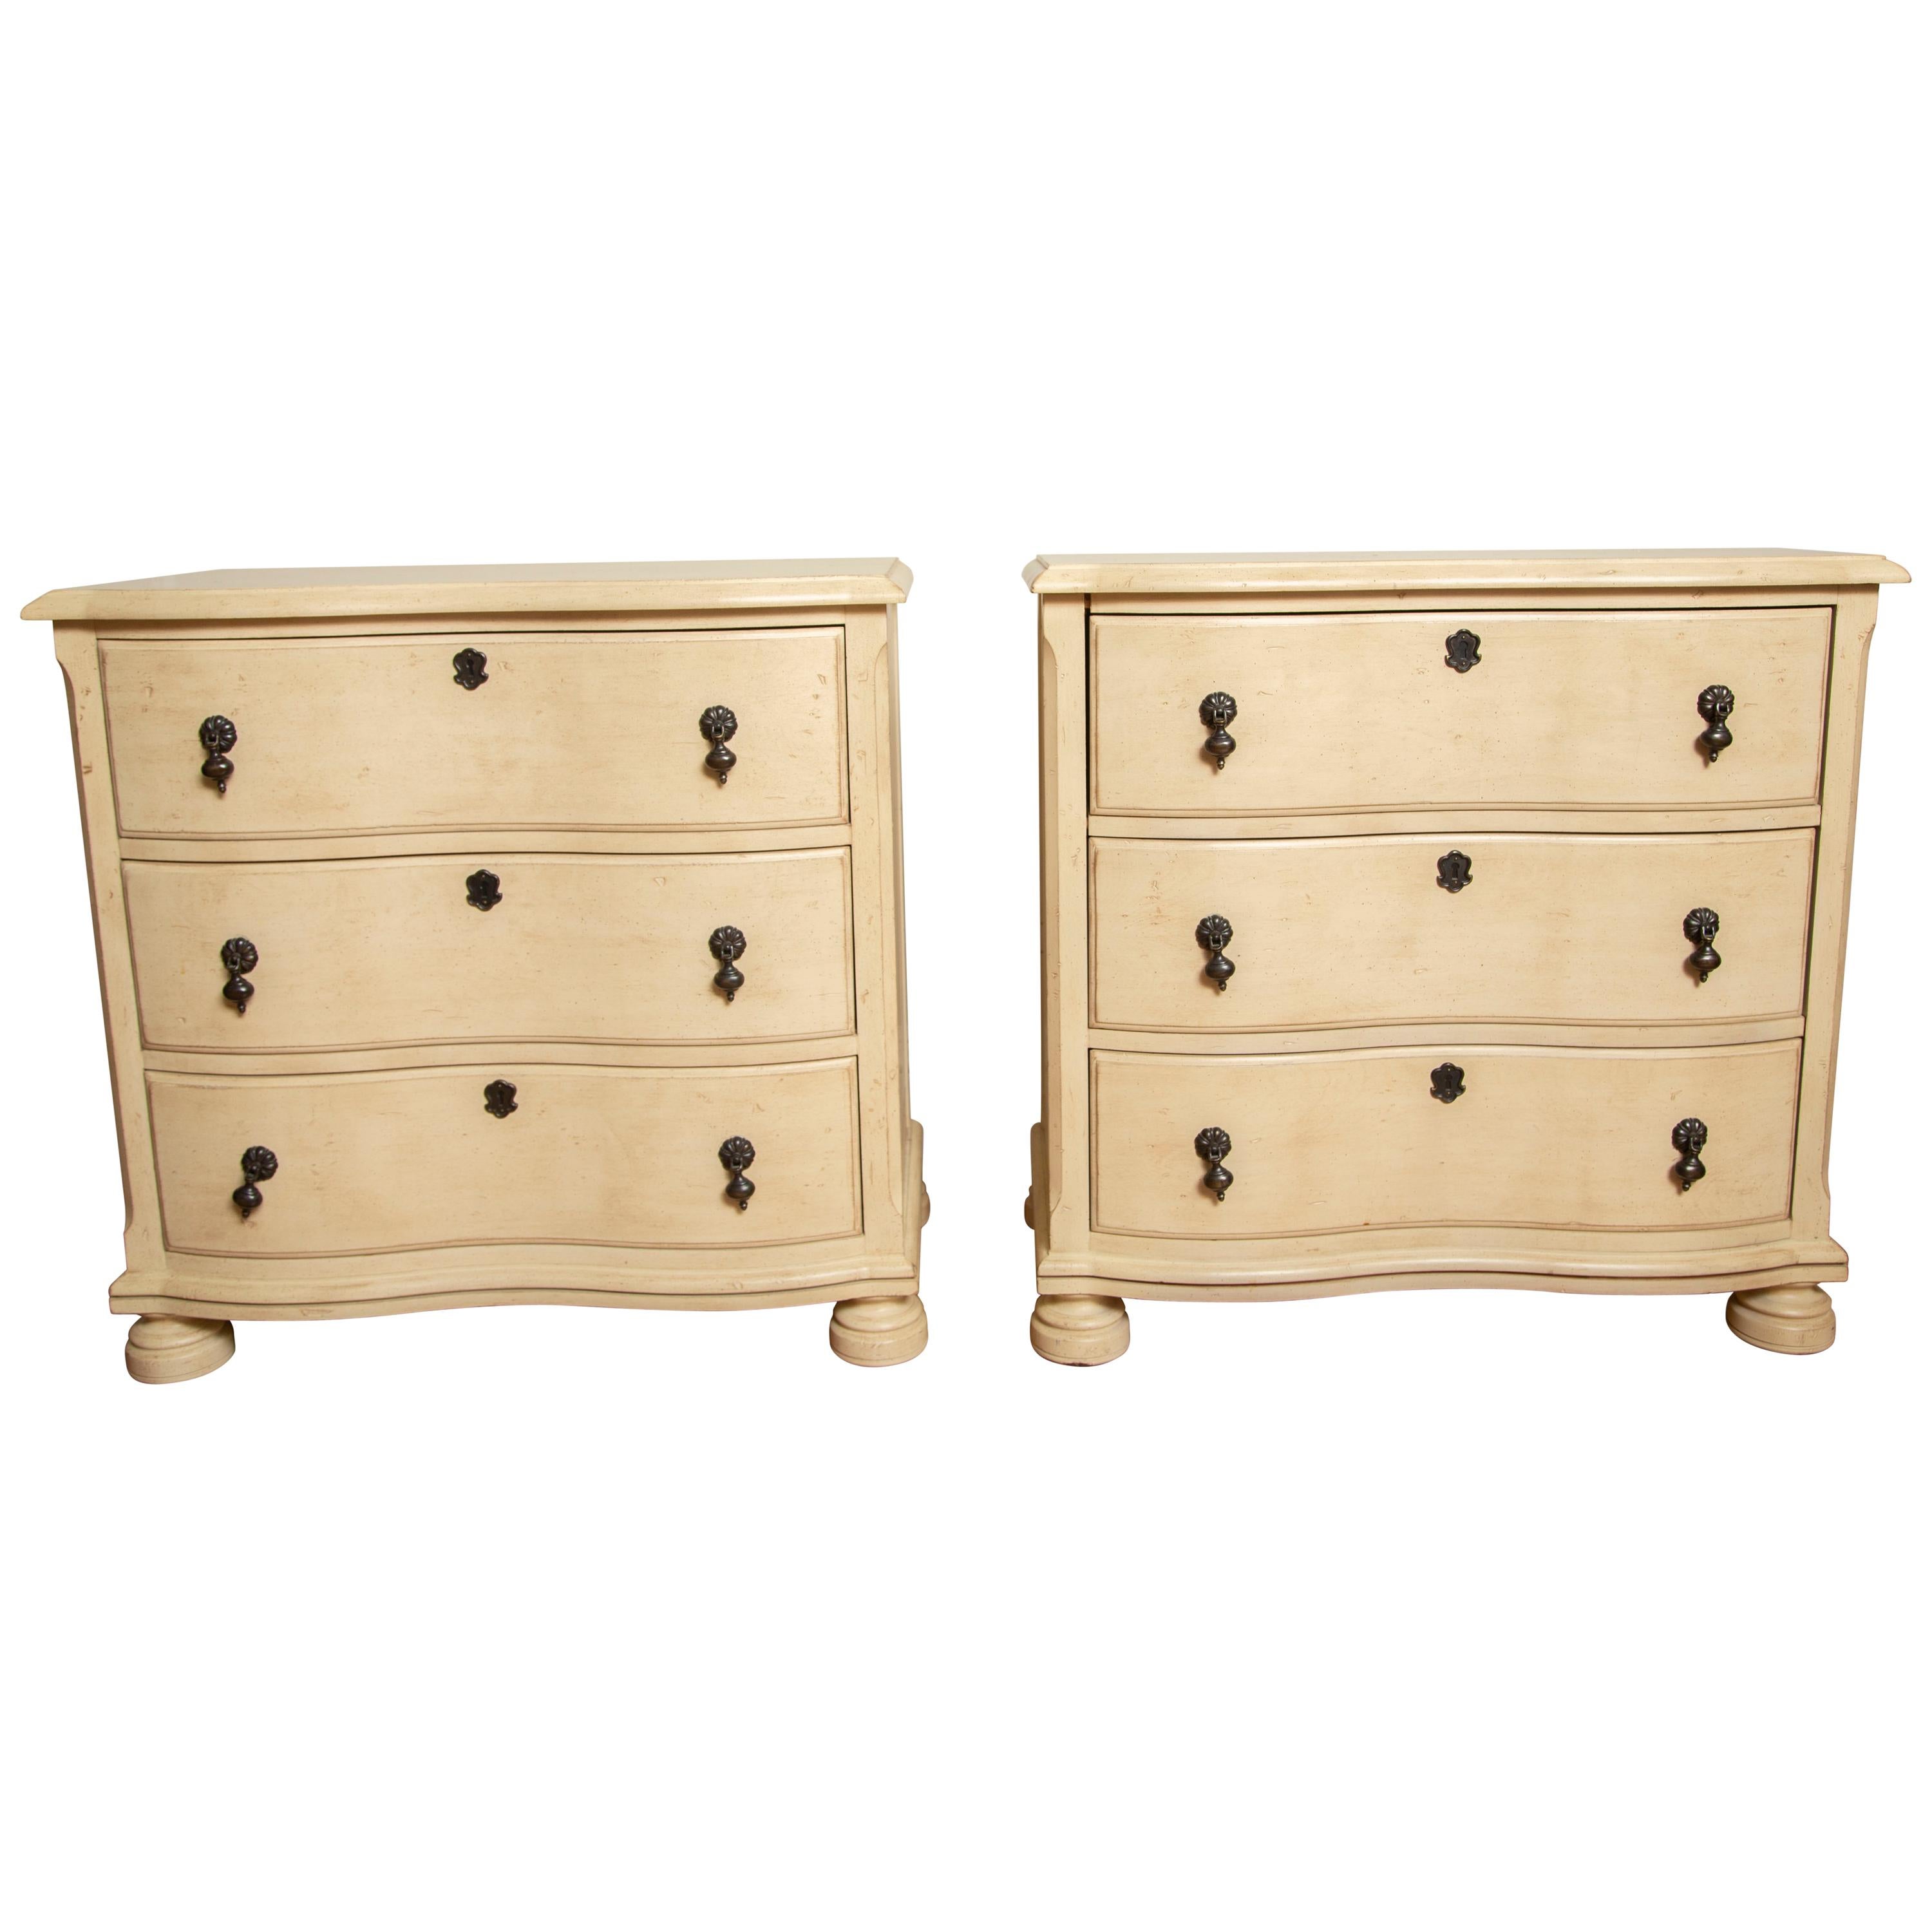 Pair of Painted Country French Chests